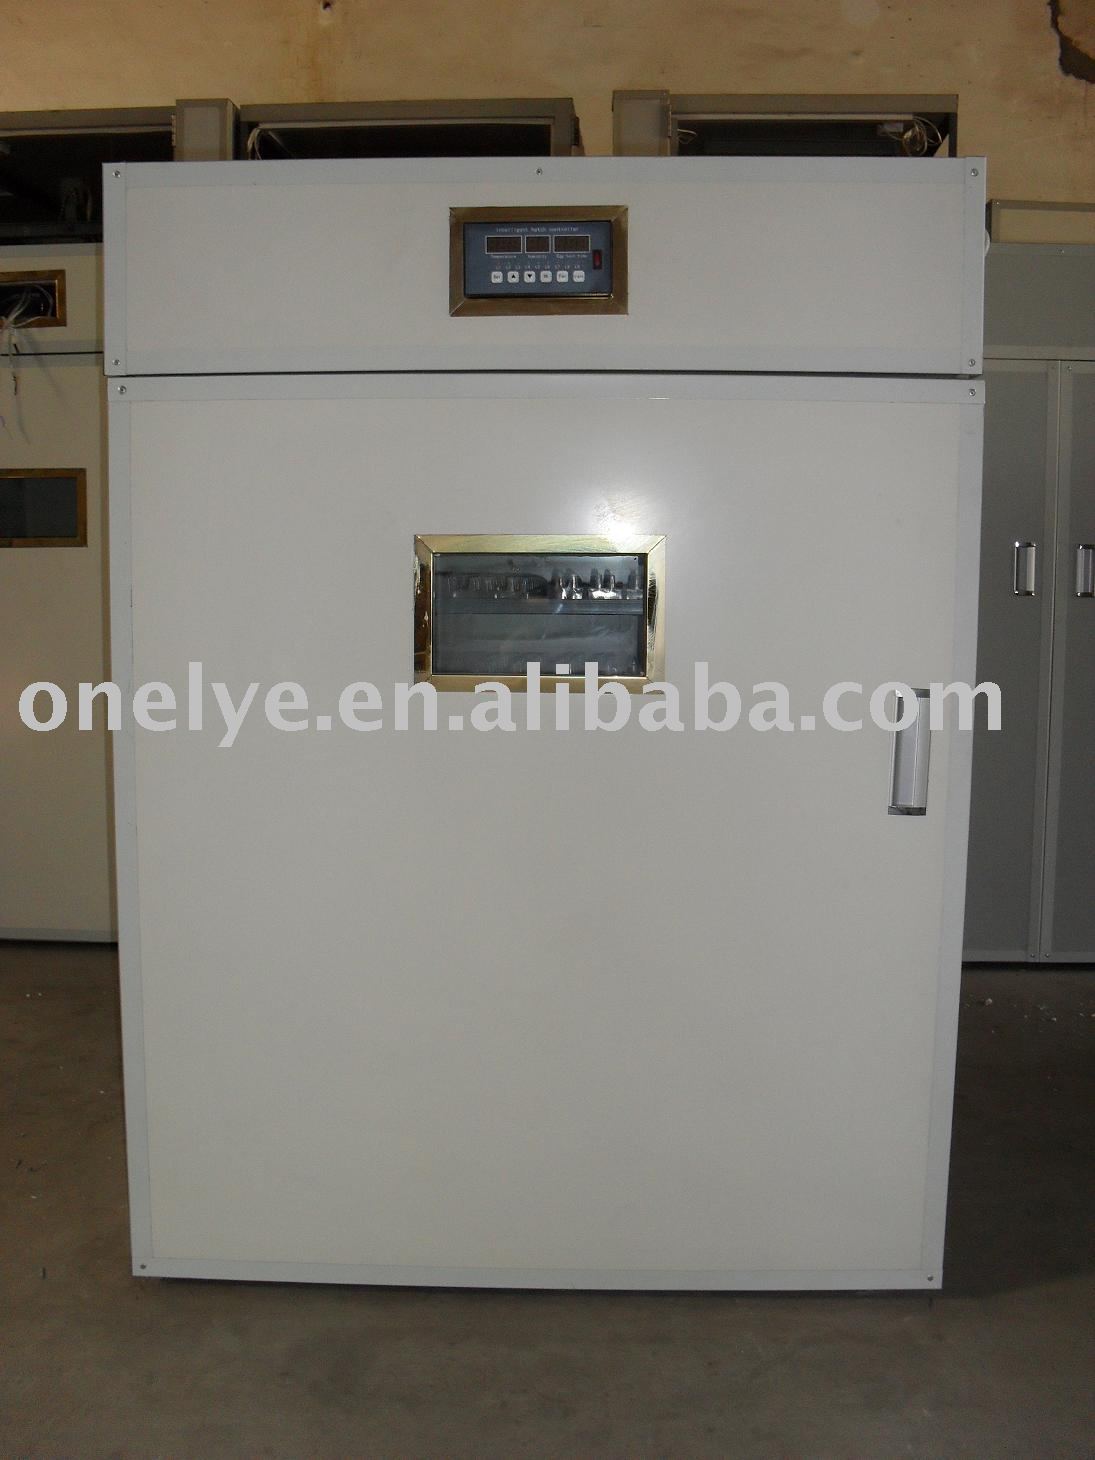 Used Chicken Incubator for Sale